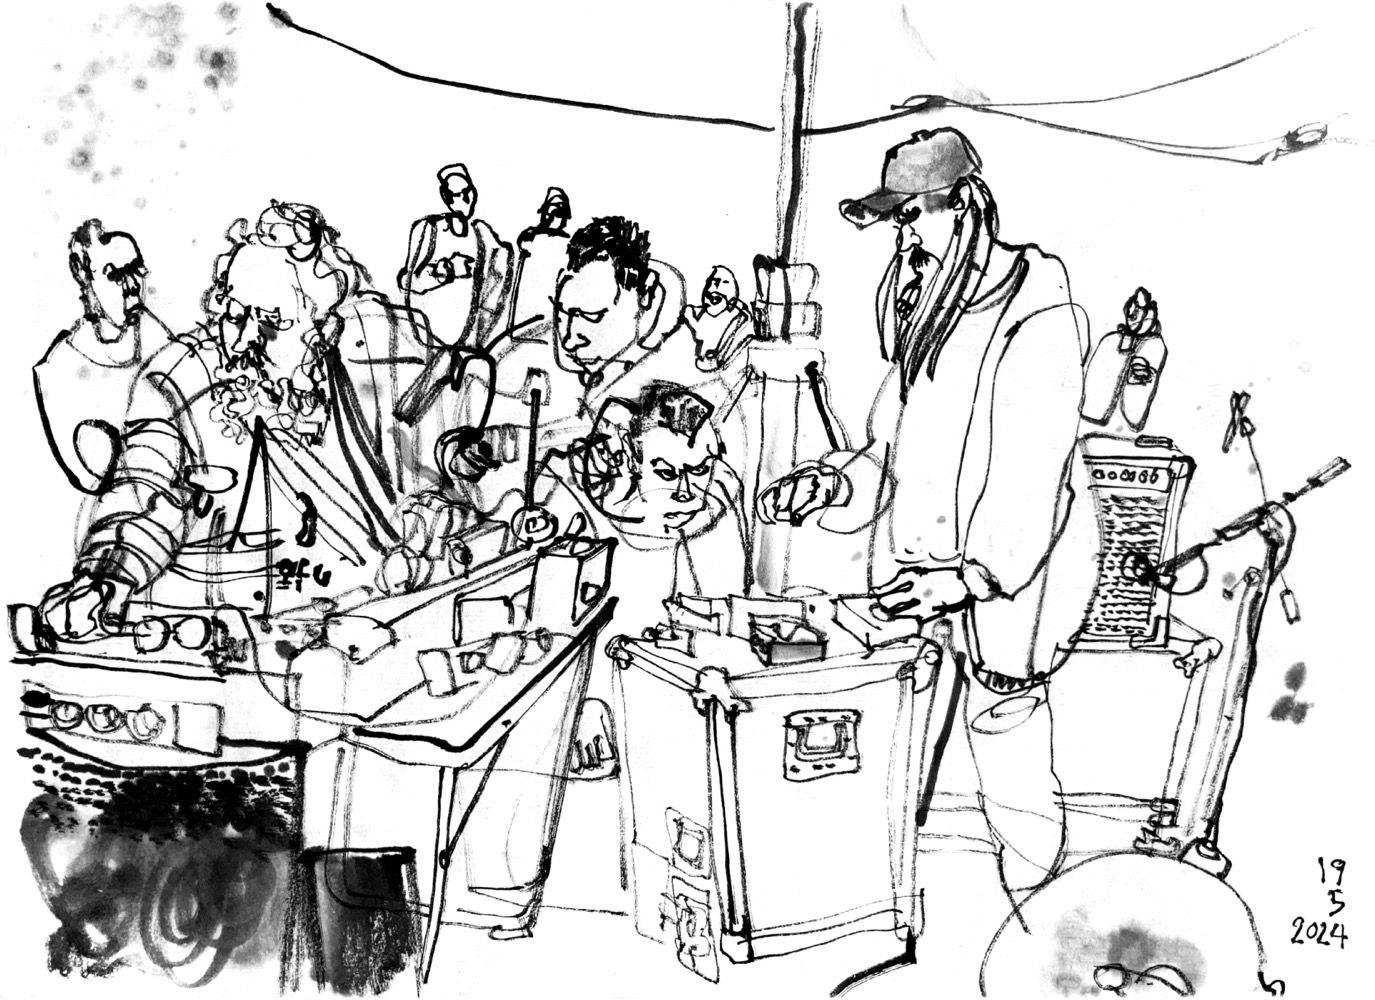 Ink drawing of three male musicians (one depicted twice), audience in the back.